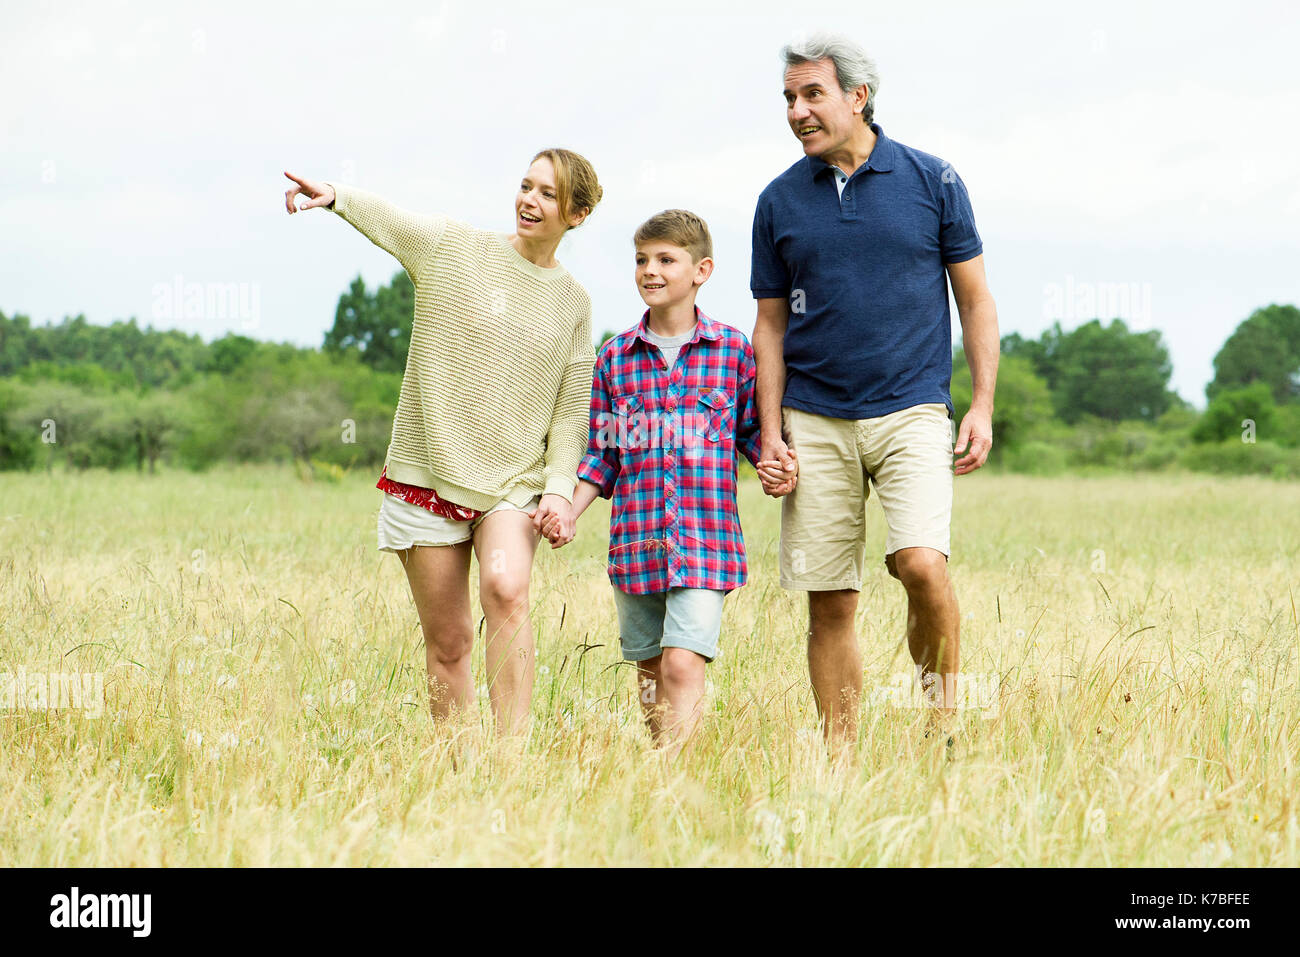 Family with one child on walk together in open field Stock Photo